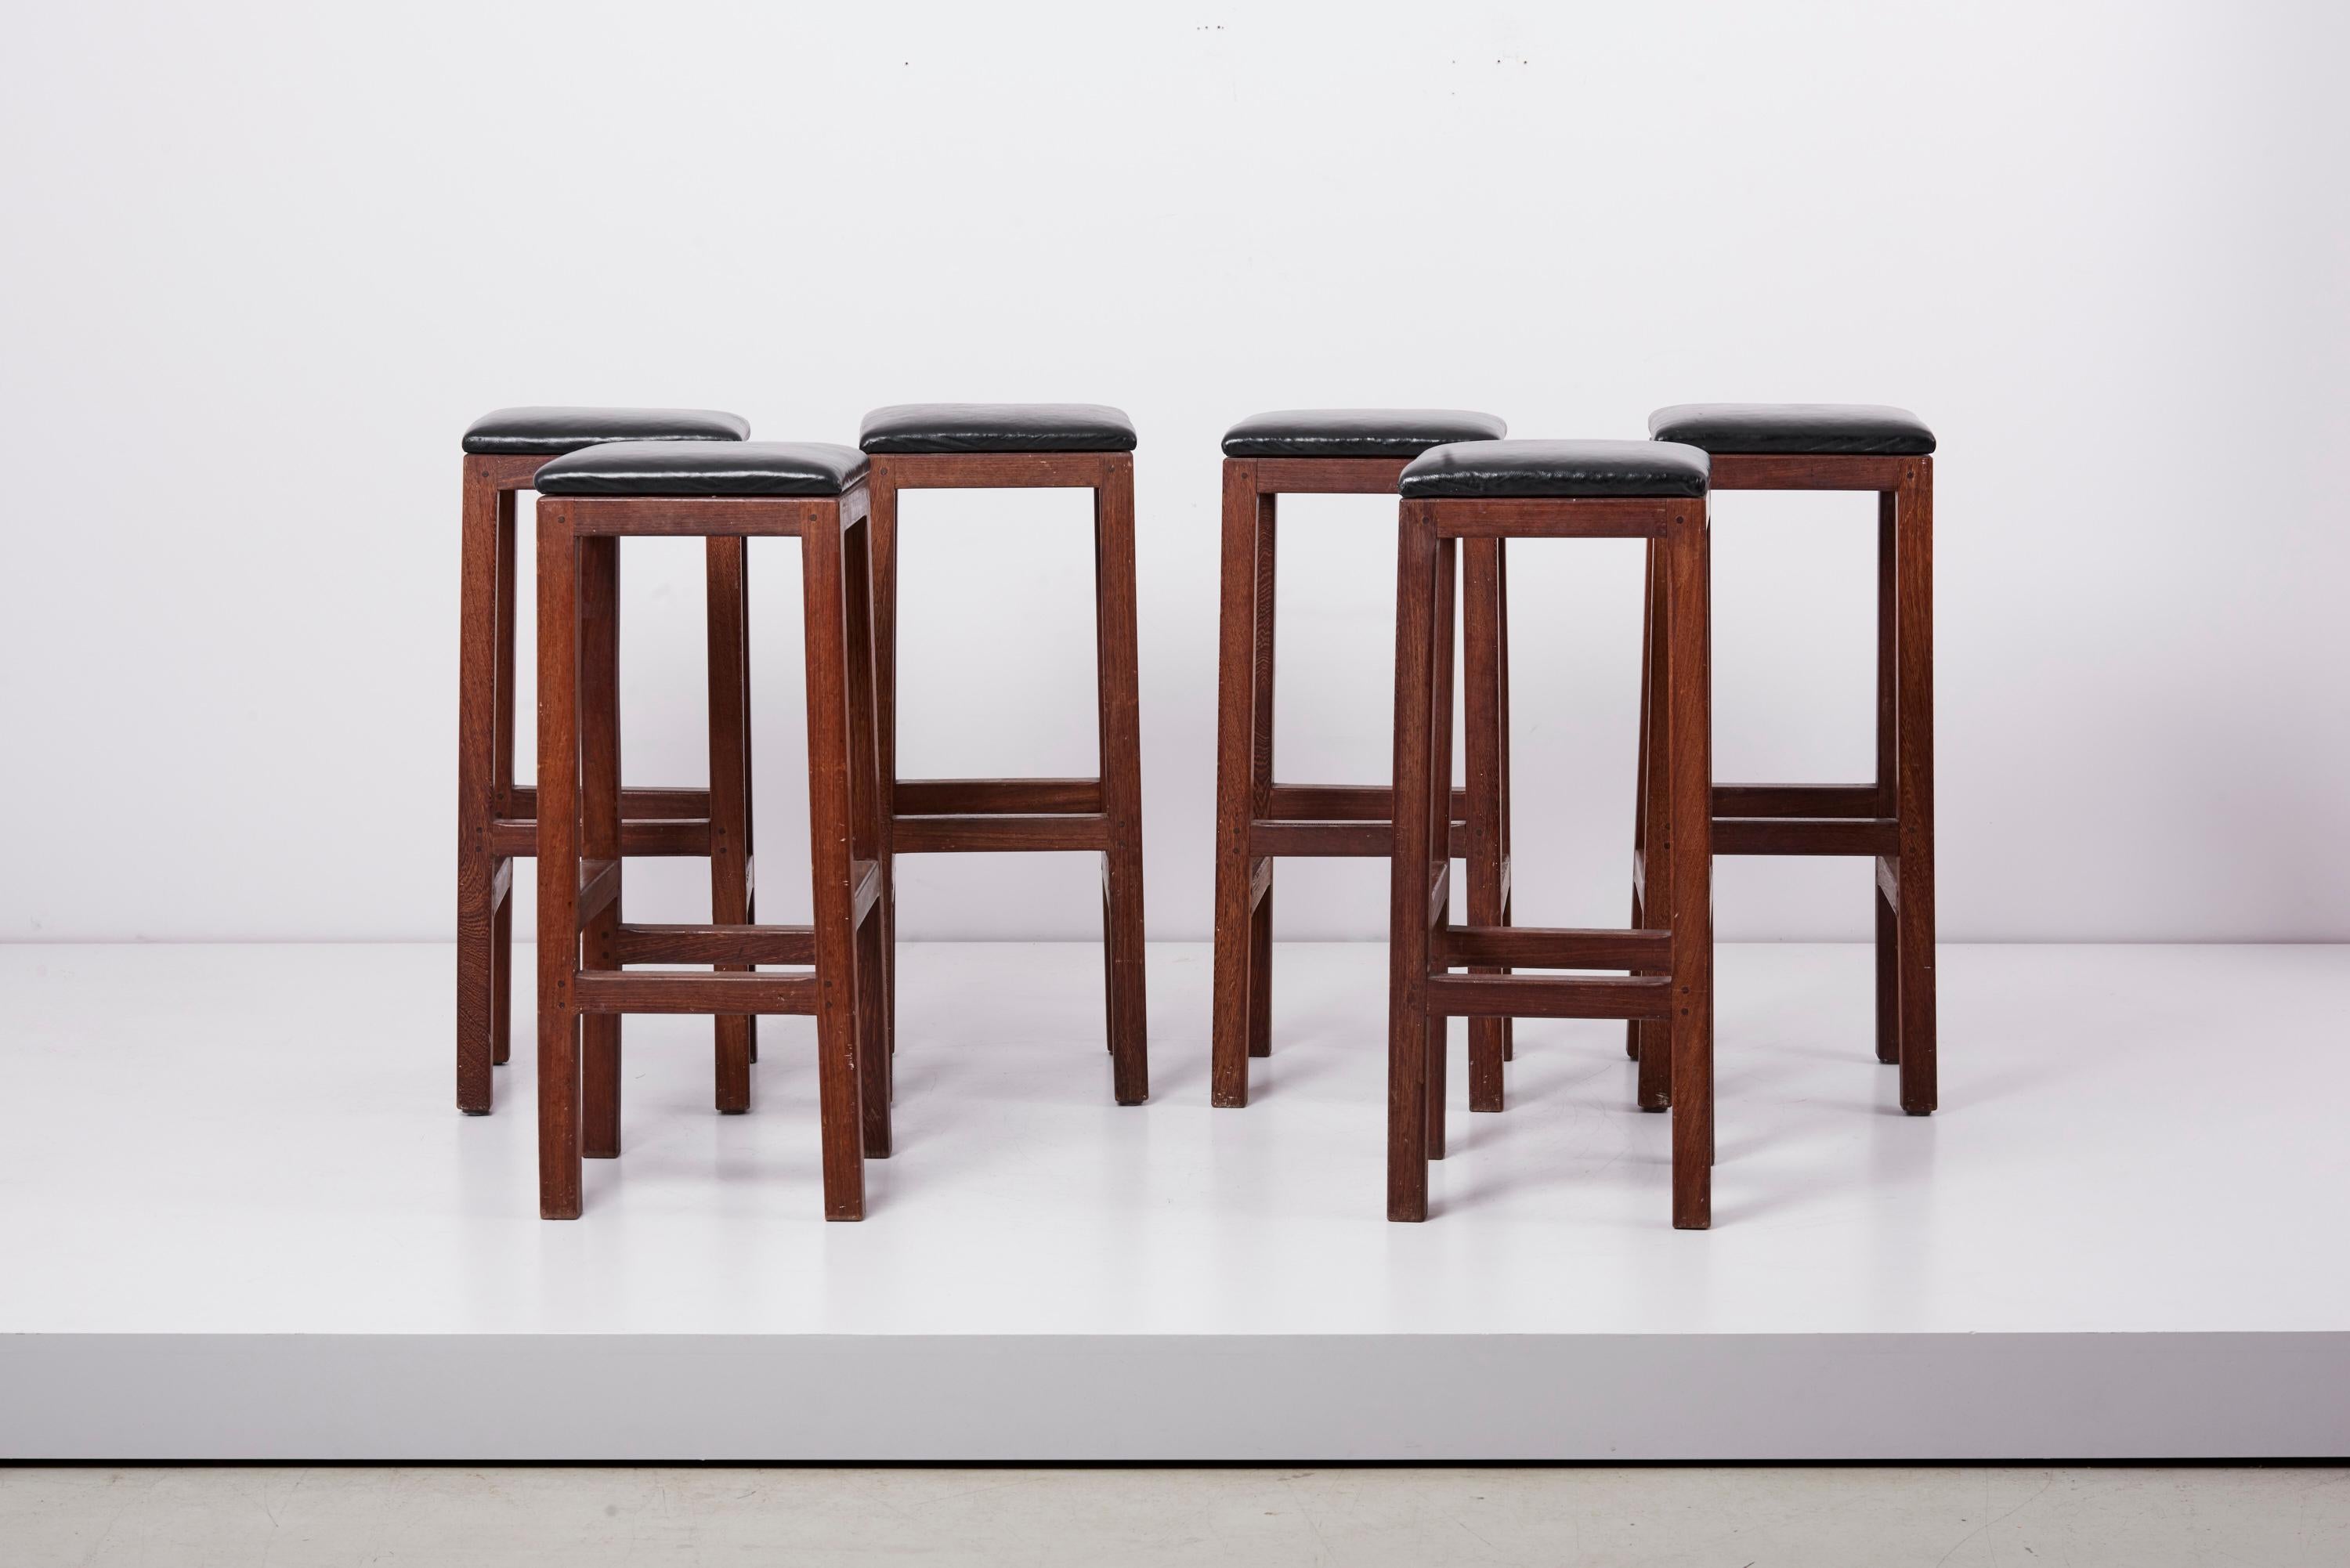 Set of six Mid-Century Modern barstools in good authentic vintage condition. Made of wood and leather.